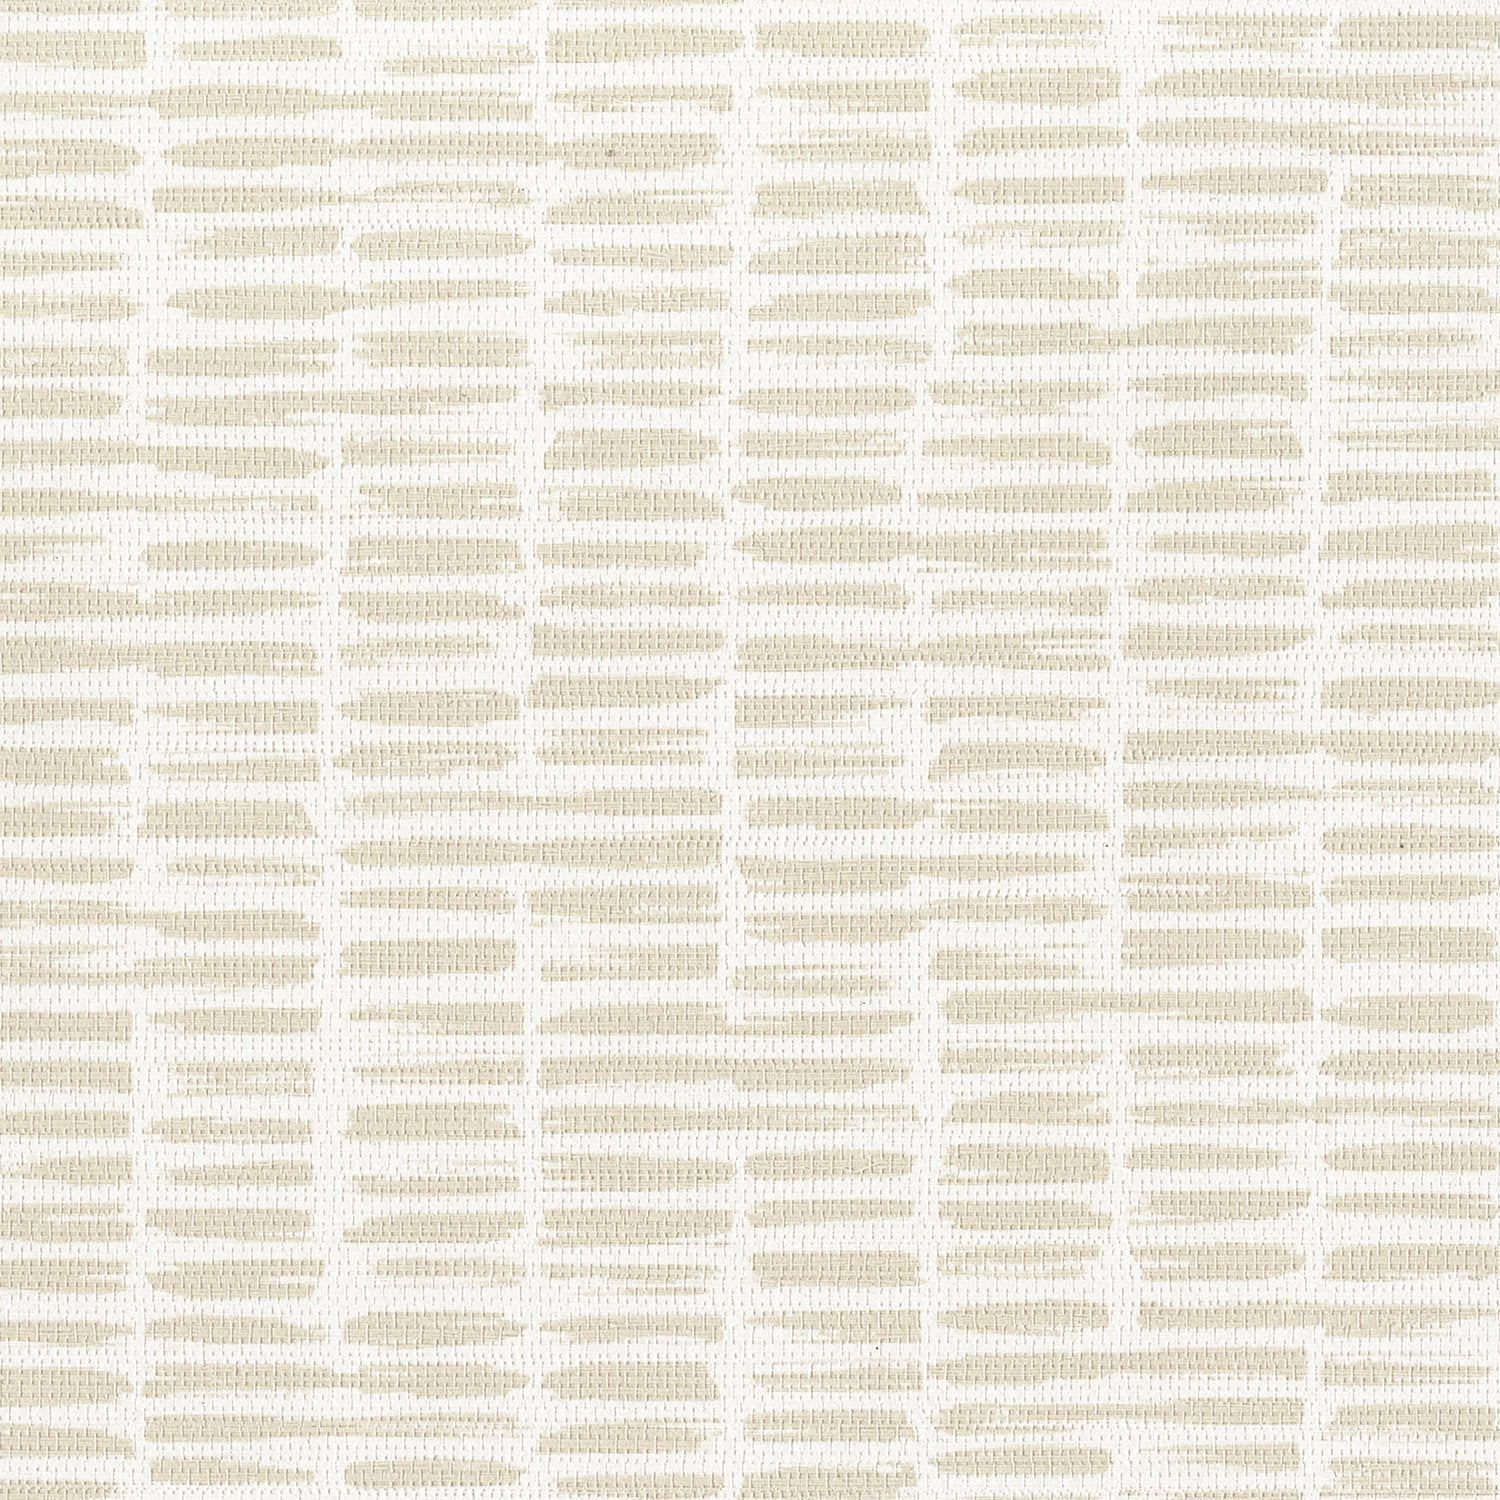 Dash-ing - Y48014 - Wallcovering - Vycon - Kube Contract